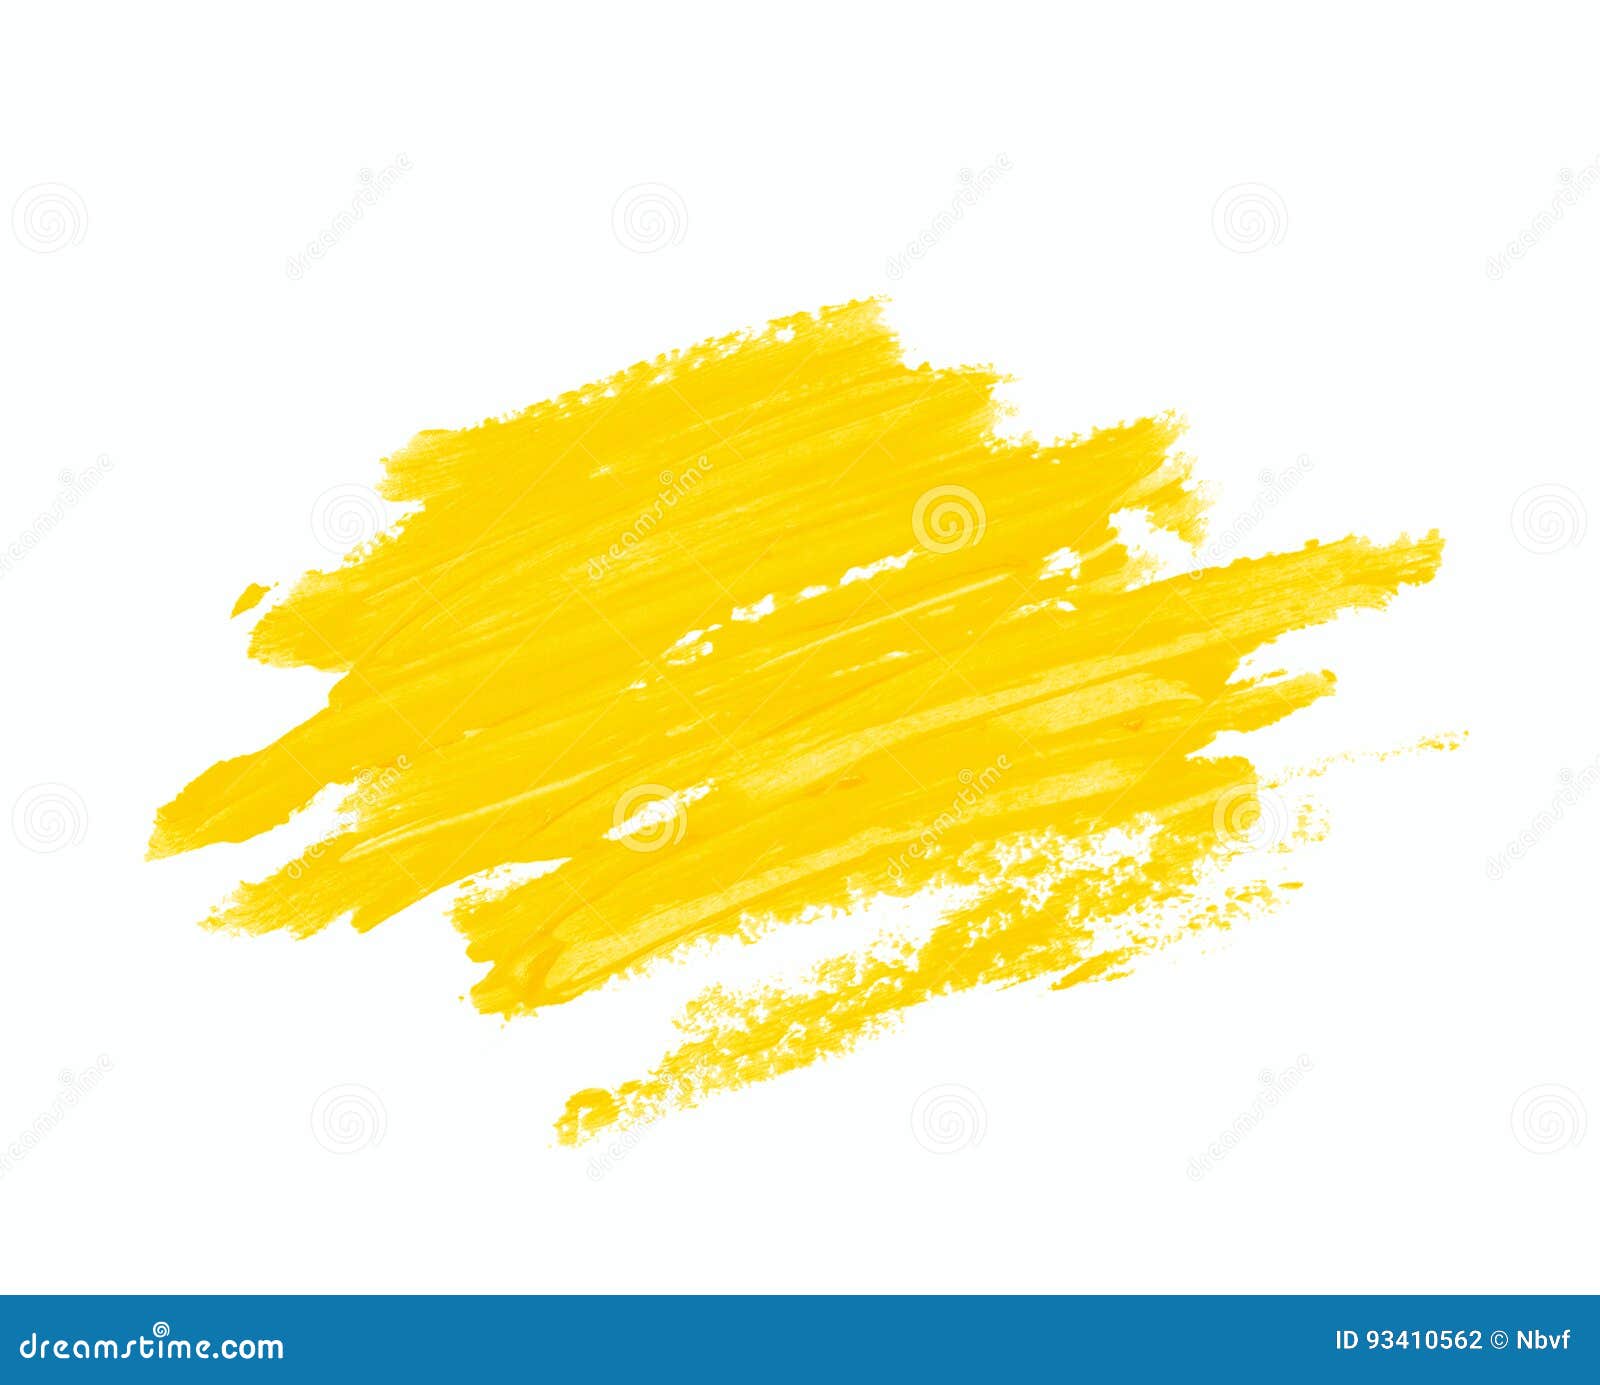 Splash of Paint Strokes Isolated Stock Photo - Image of stroke, water ...